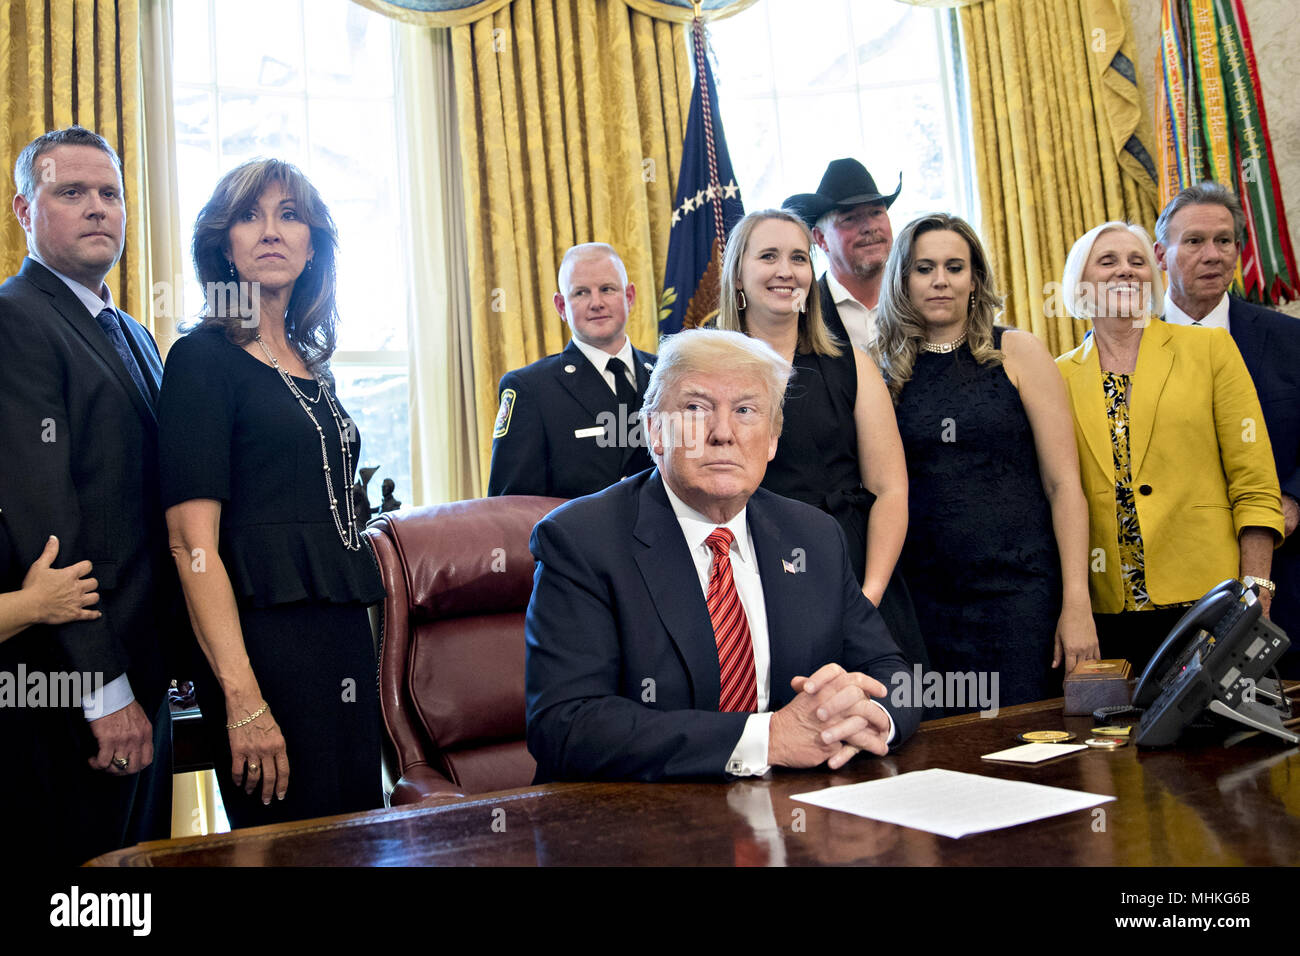 United States President Donald Trump, center, waits to speak next to Tammie Jo Shults, a Southwest Airlines Co. captain, second left, and Darren Ellisor, a Southwest Airlines first officer, left, while meeting with the crew and passengers of Southwest Airlines flight 1380 in the Oval Office of the White House in Washington, DC, U.S., on Tuesday, May 1, 2018. An engine on Southwest's flight 1380, a Boeing Co. 737-700 bound for Dallas from New York's LaGuardia airport, exploded and made an emergency landing on April 17 sending shrapnel into the plane and killing a passenger seated near a windo Stock Photo